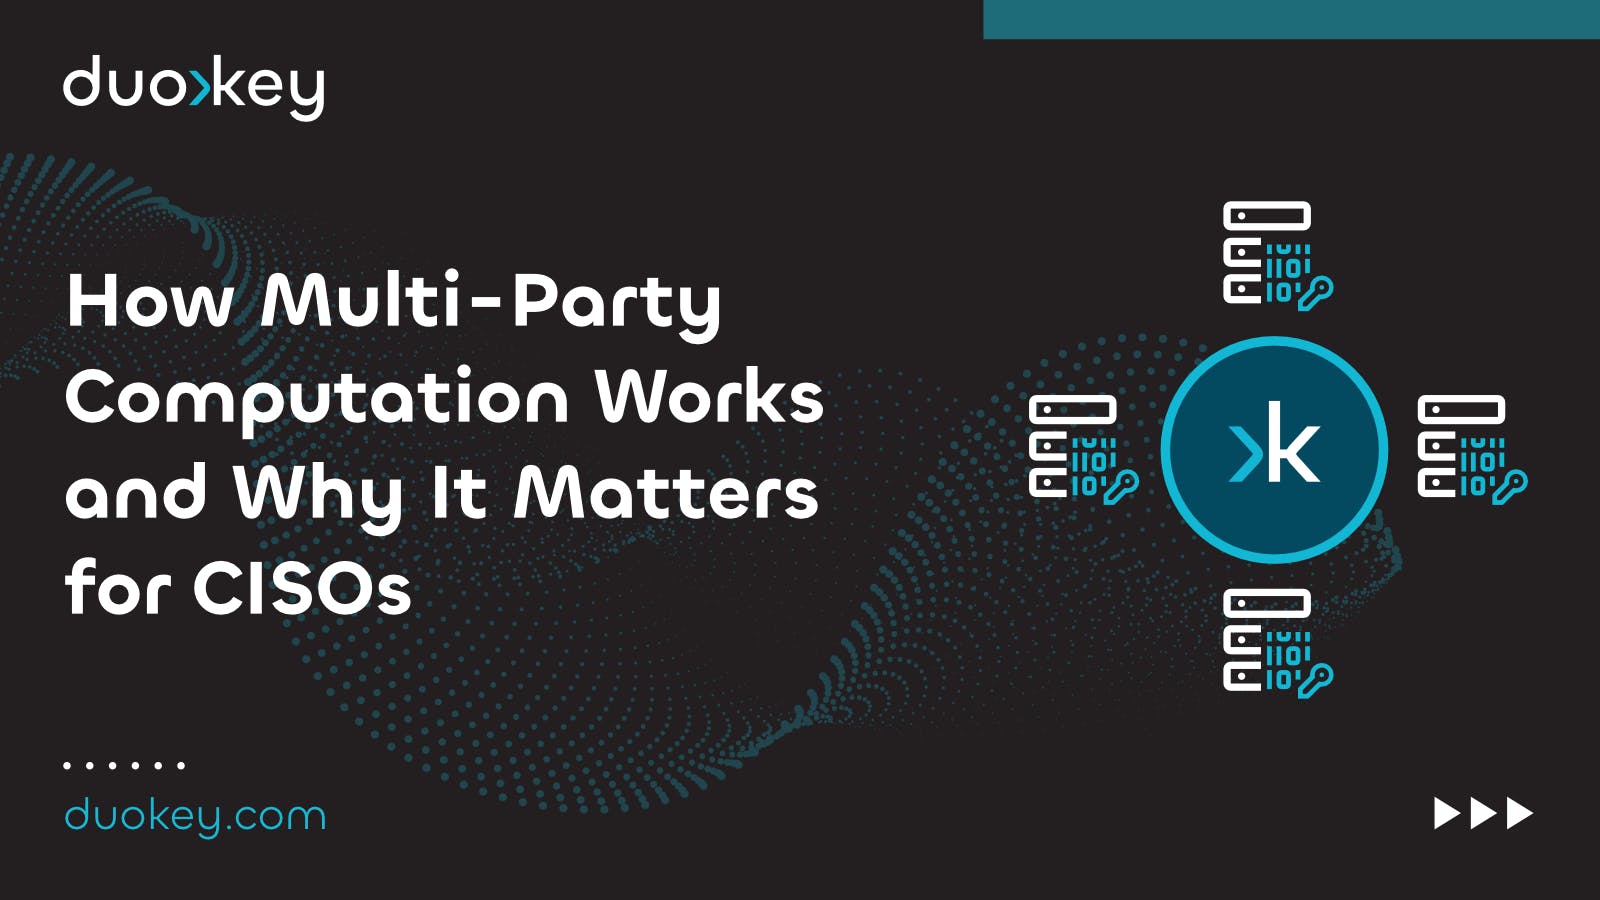 Discover what is secure Multi-Party Computation (or MPC for short) and why CISOs should pay closer attention to this advanced technology for encryption key generation, storage and management.